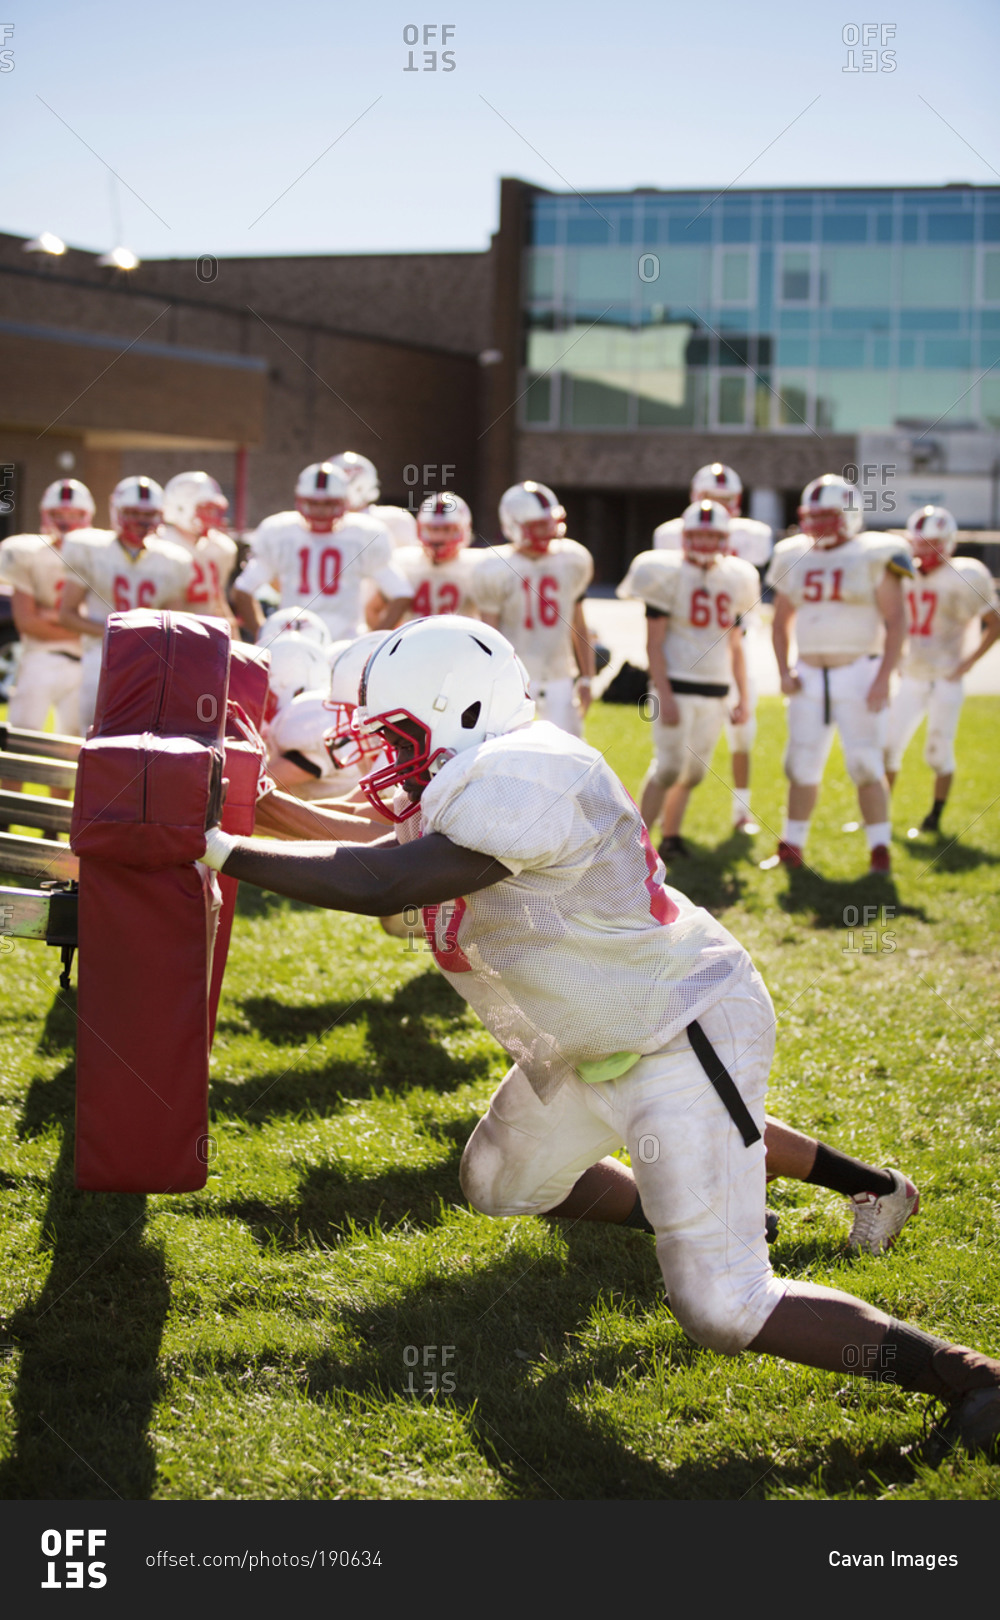 A high school football team practices using tackling dummies